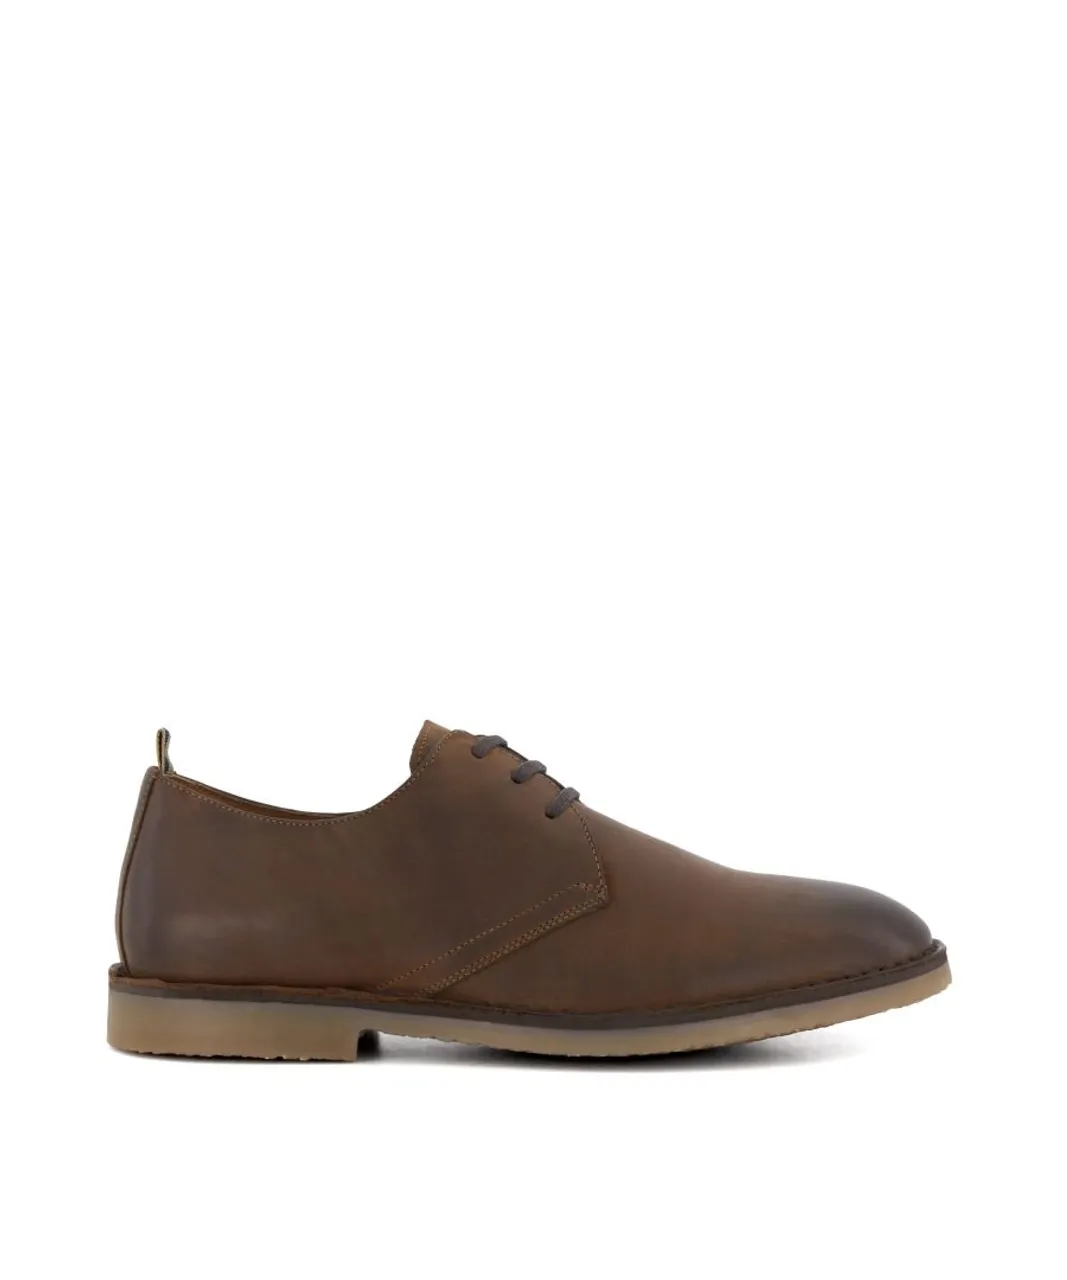 Dune London Mens BROOKED Casual Lace-Up Shoes - Brown Suede